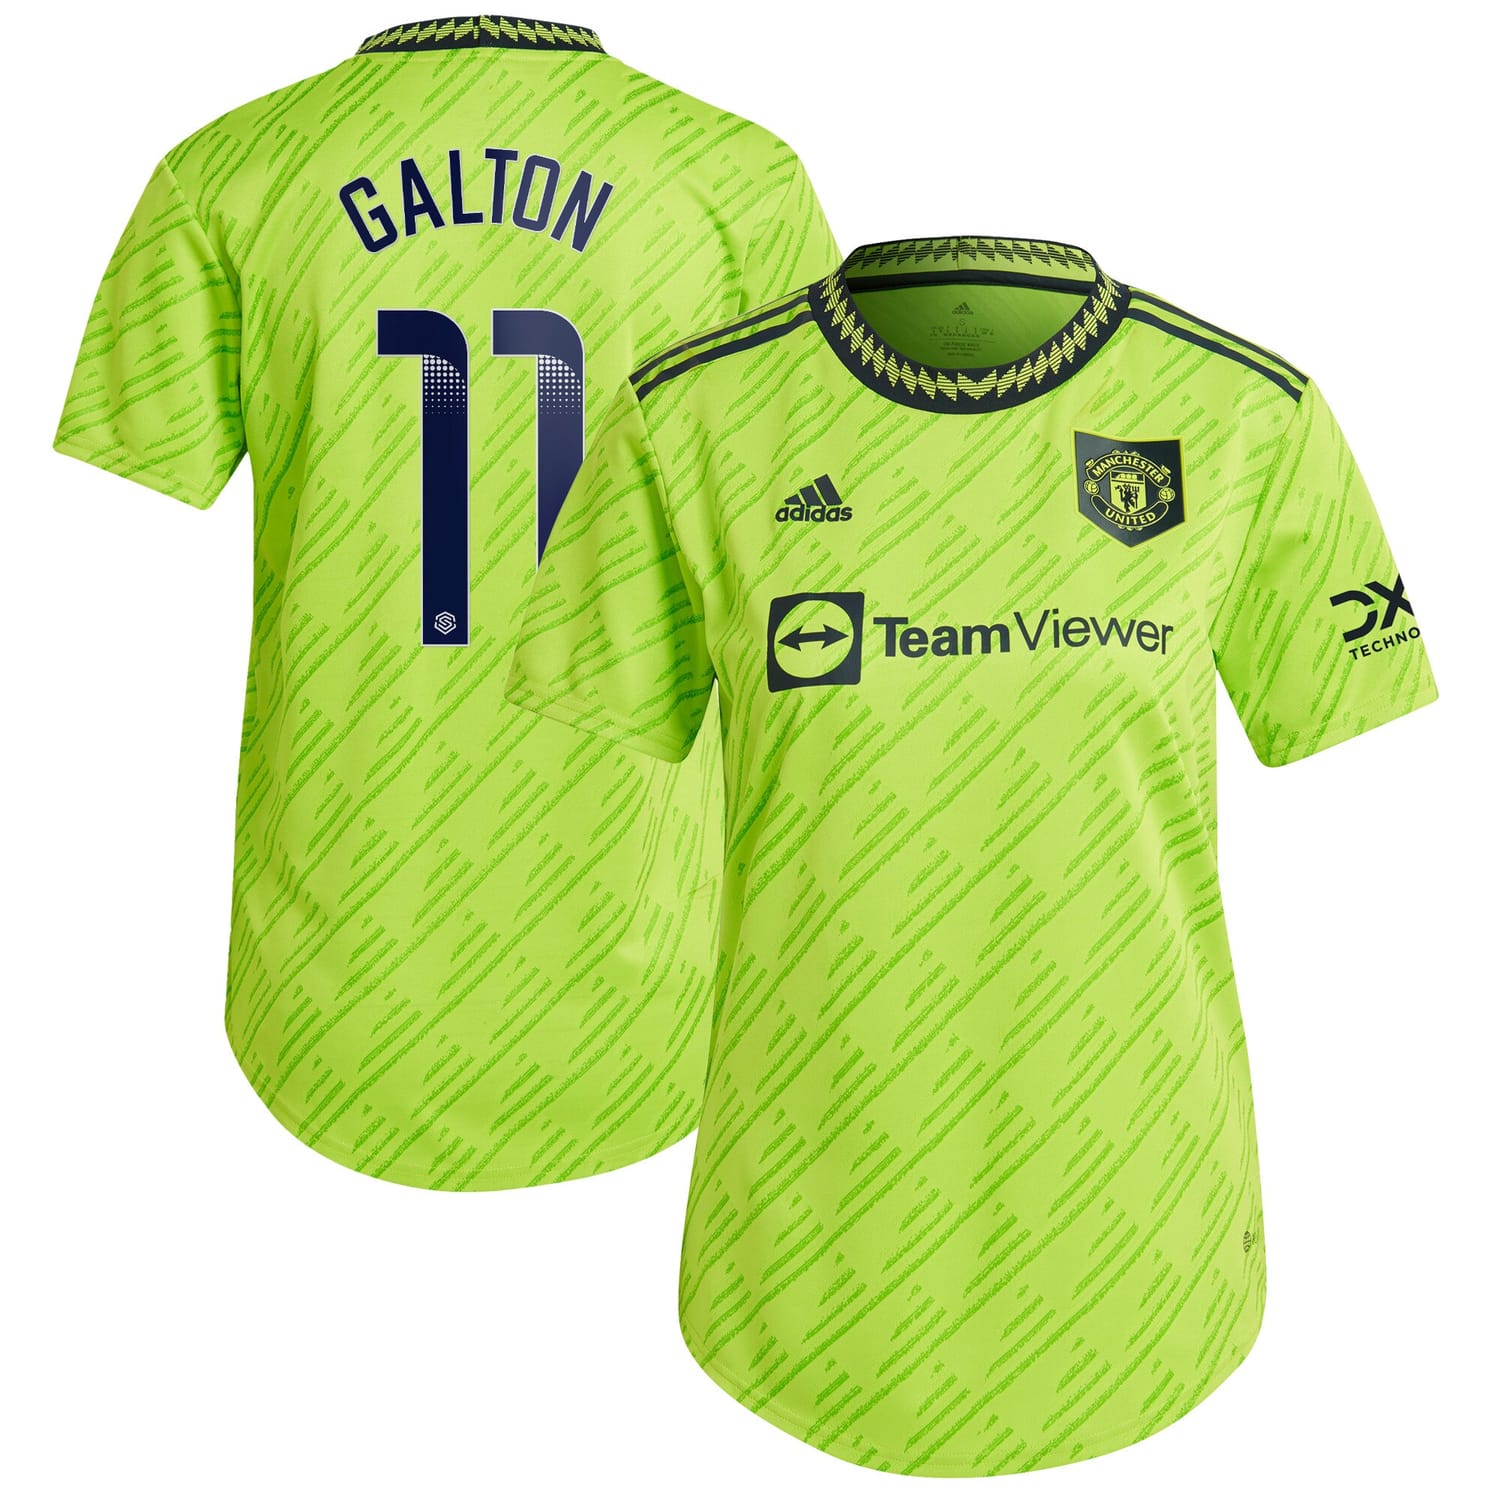 Premier League Manchester United Third WSL Authentic Jersey Shirt 2022-23 player Leah Galton 11 printing for Women